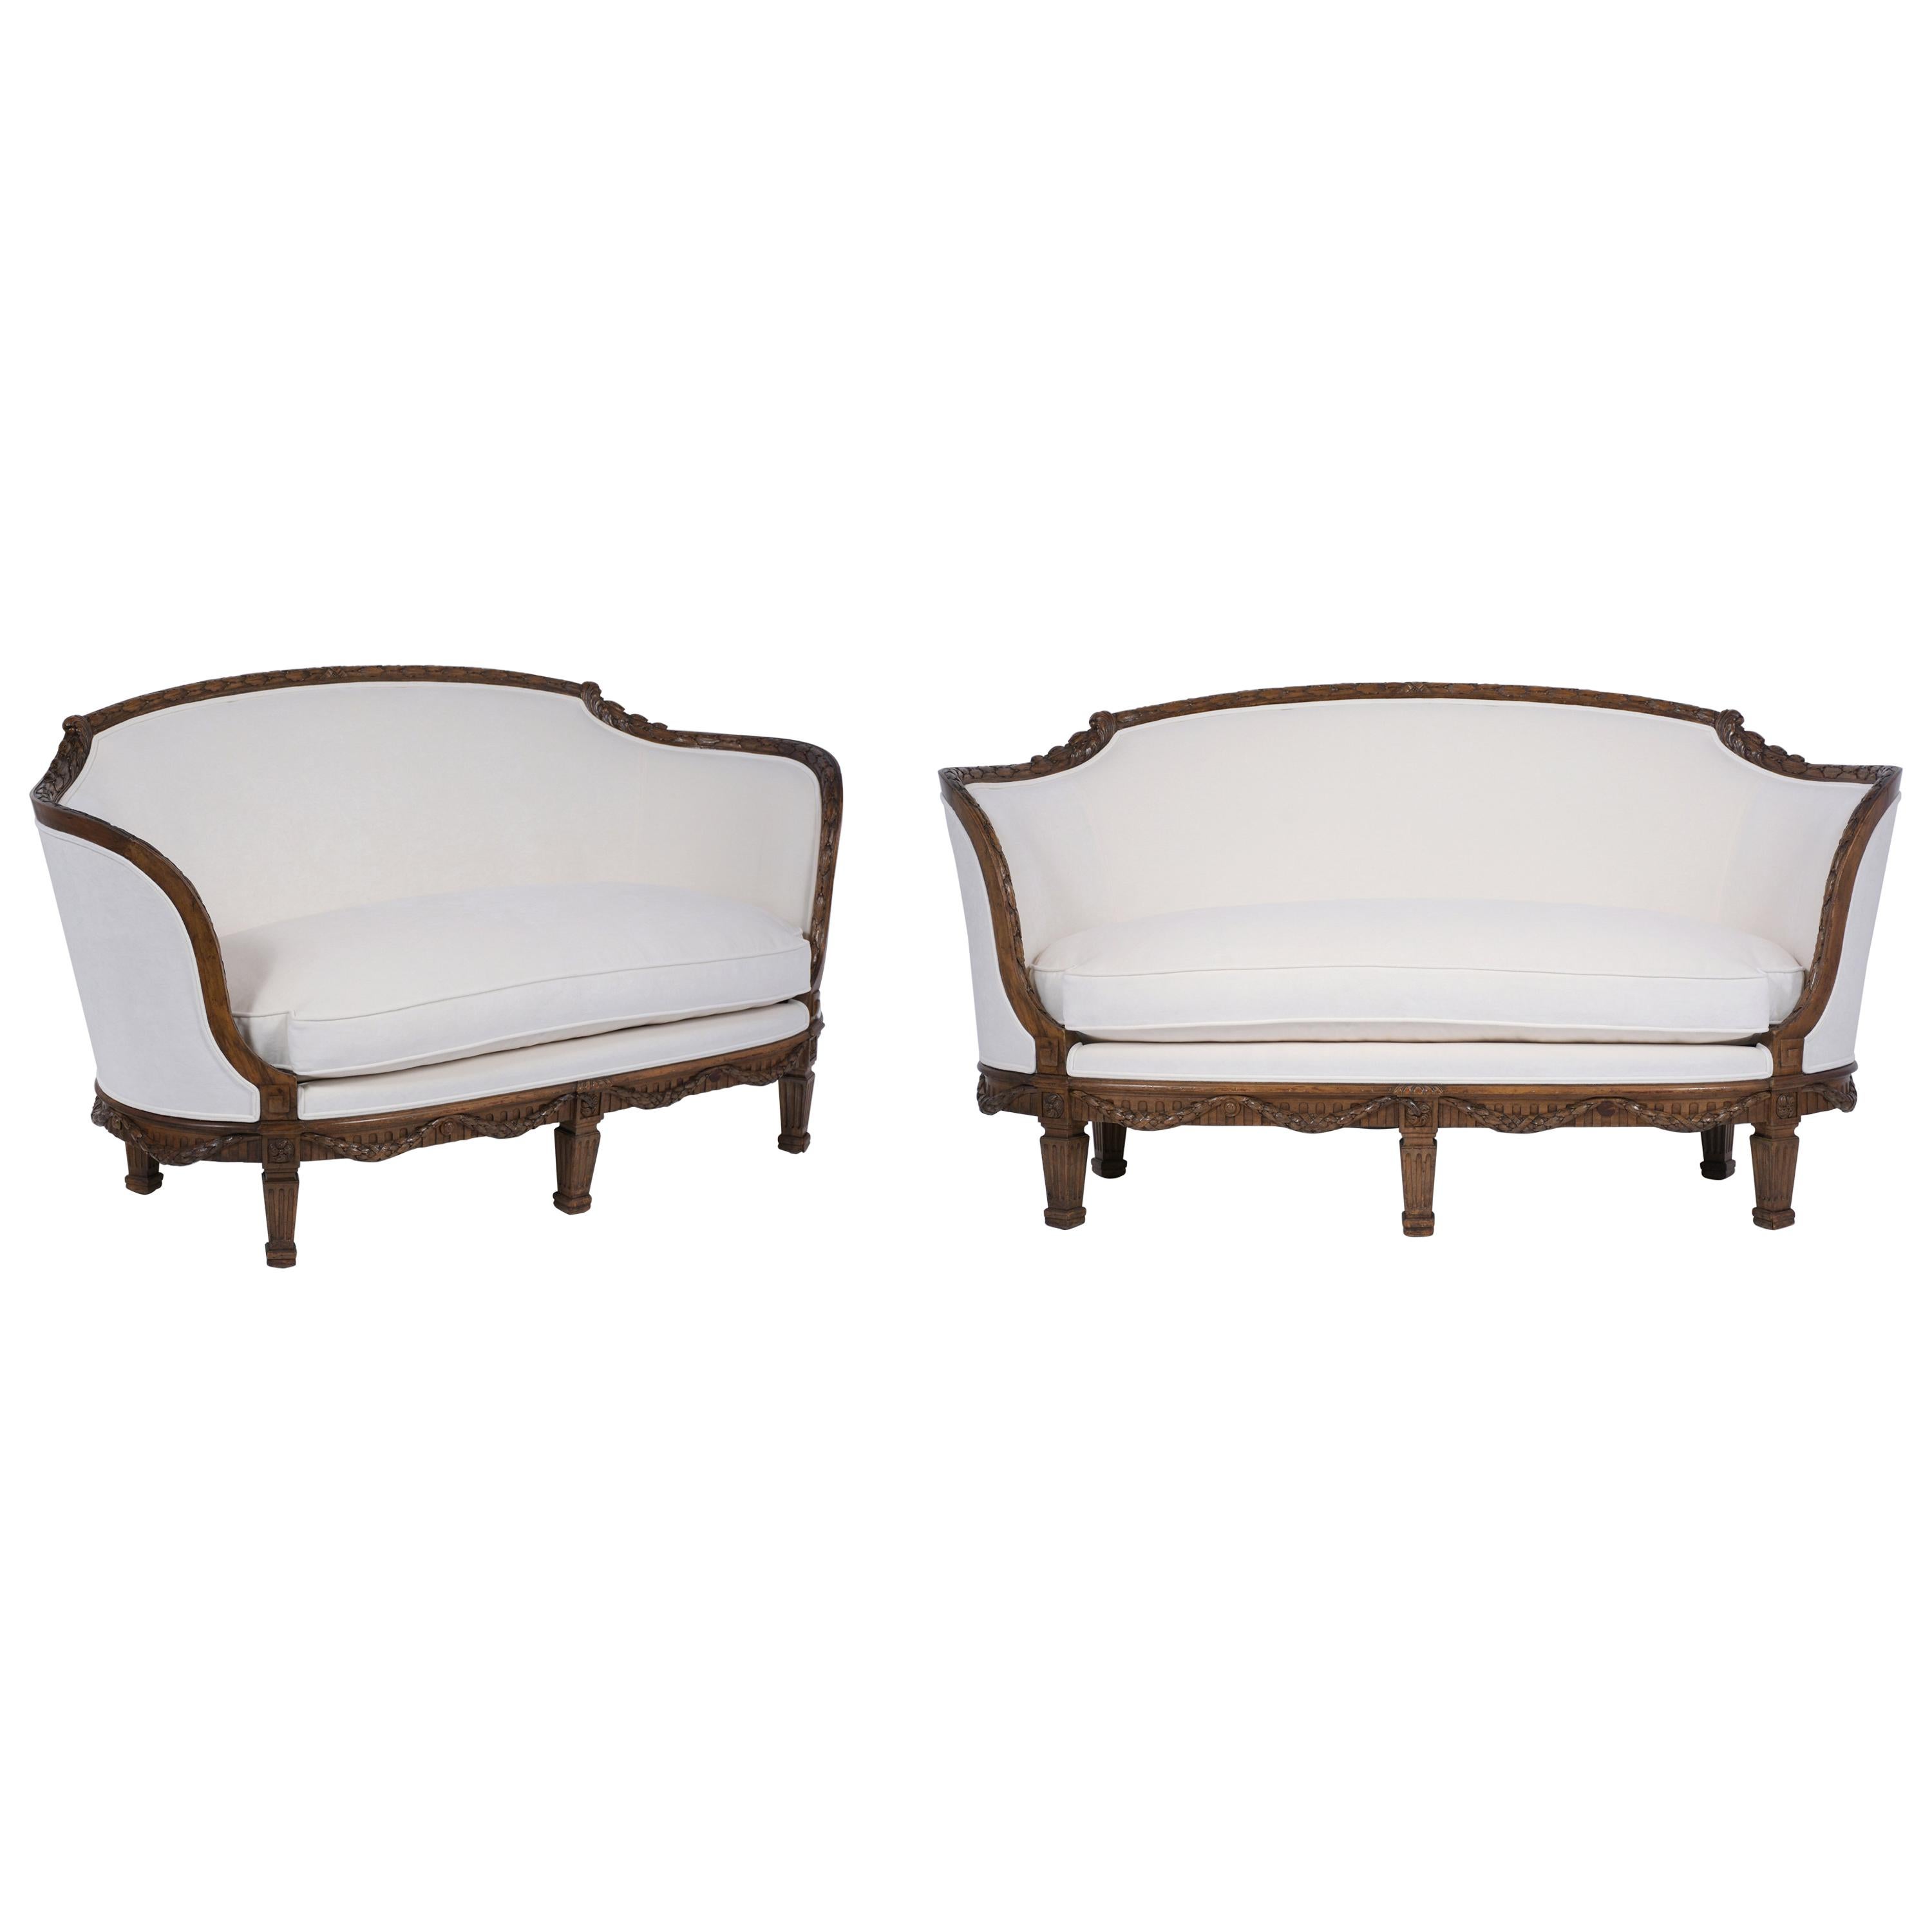 Pair of French 19th Century Settees